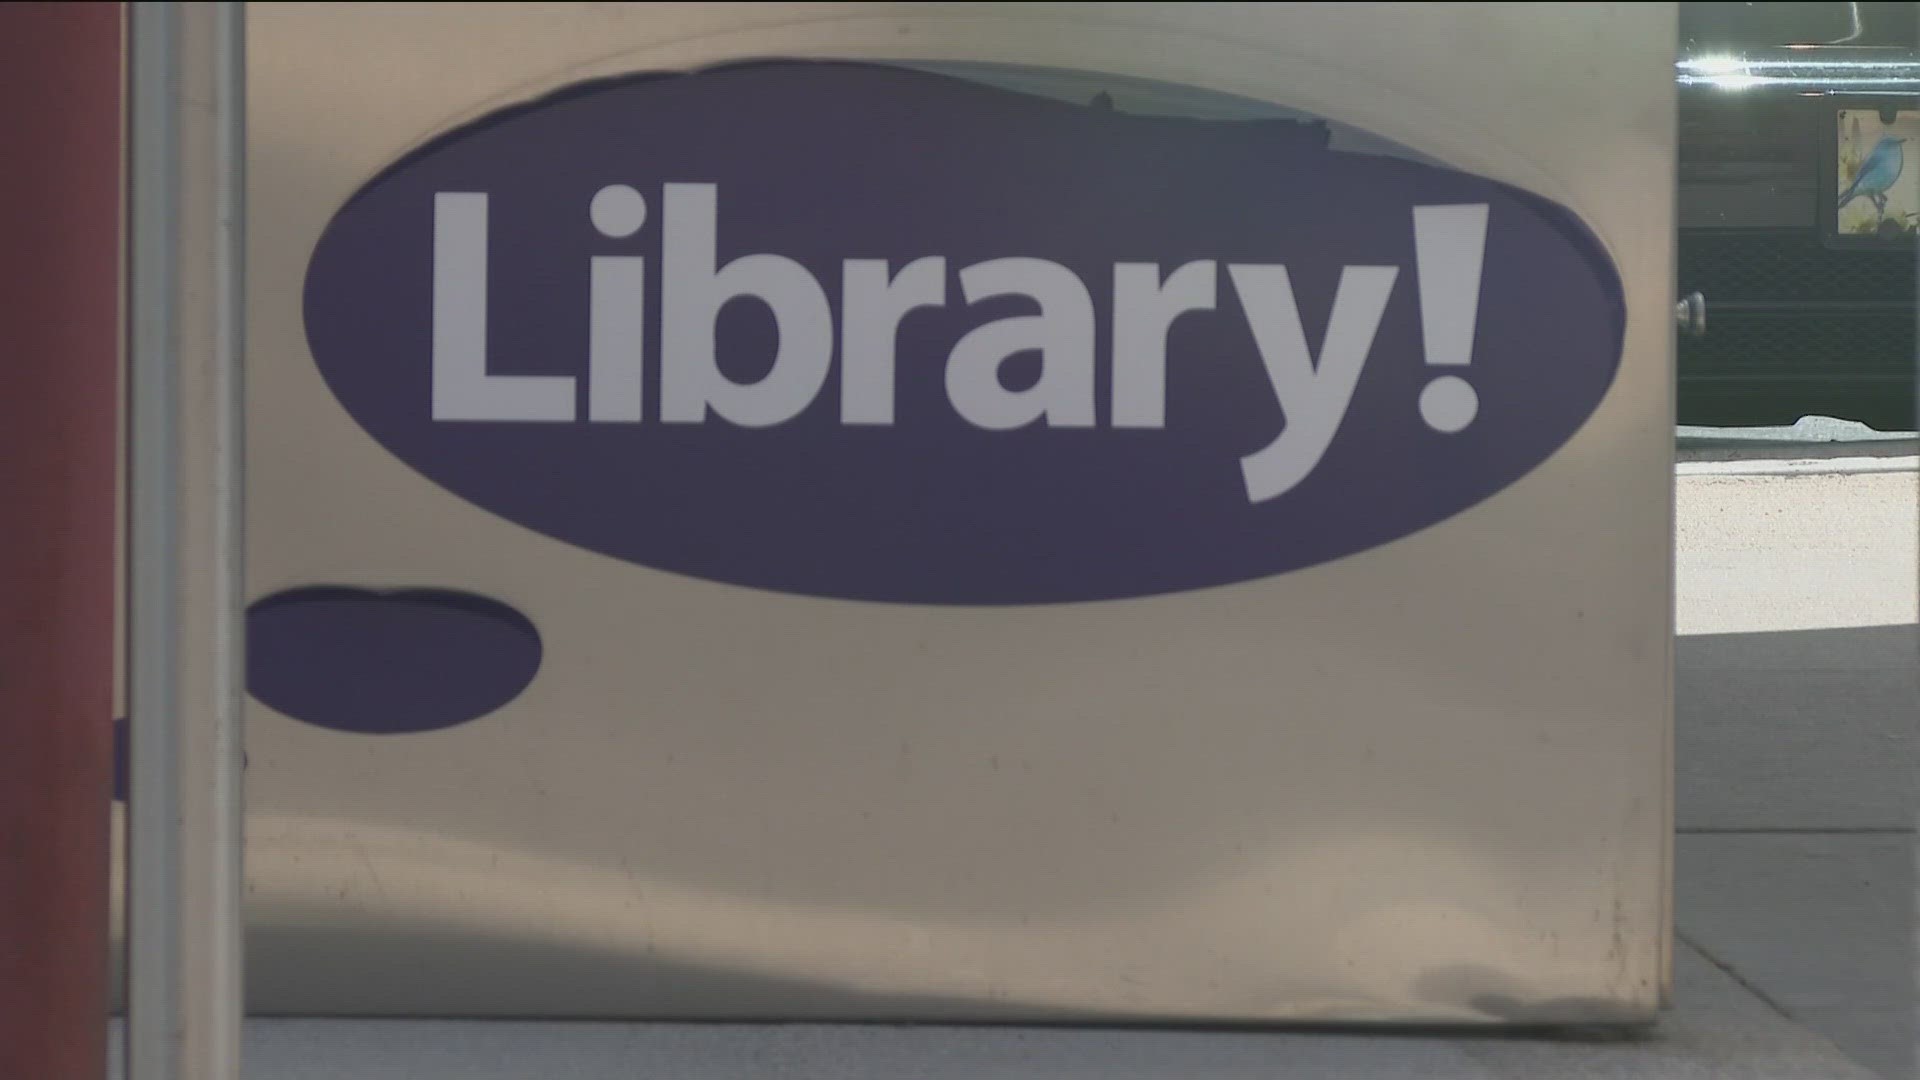 The "restricted library cards" allow parents to have control over what their kids check out as many libraries across the state are pulling books from shelves.